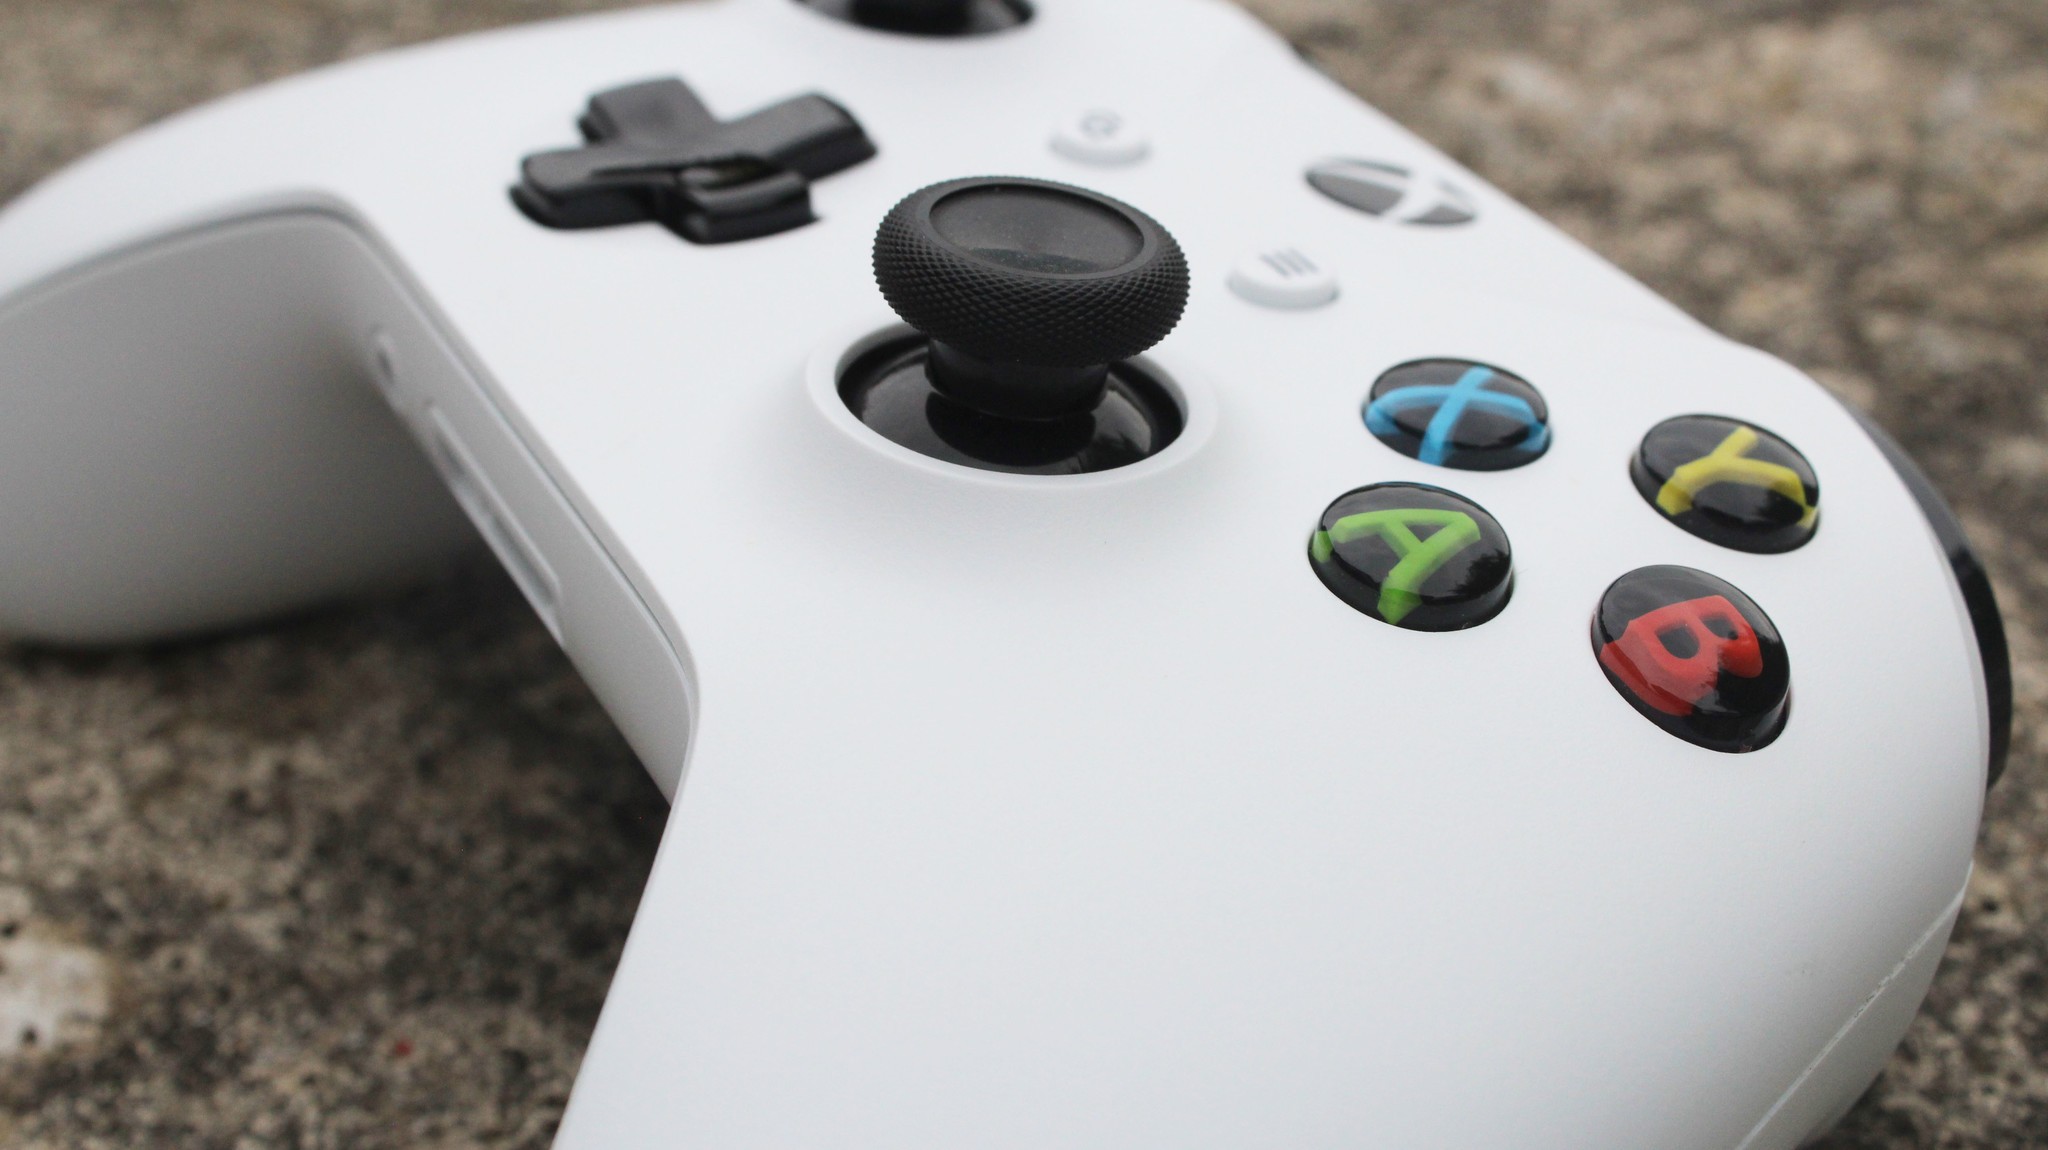 How To Connect An Xbox One Or Xbox 360 Controller To Your Mac Imore